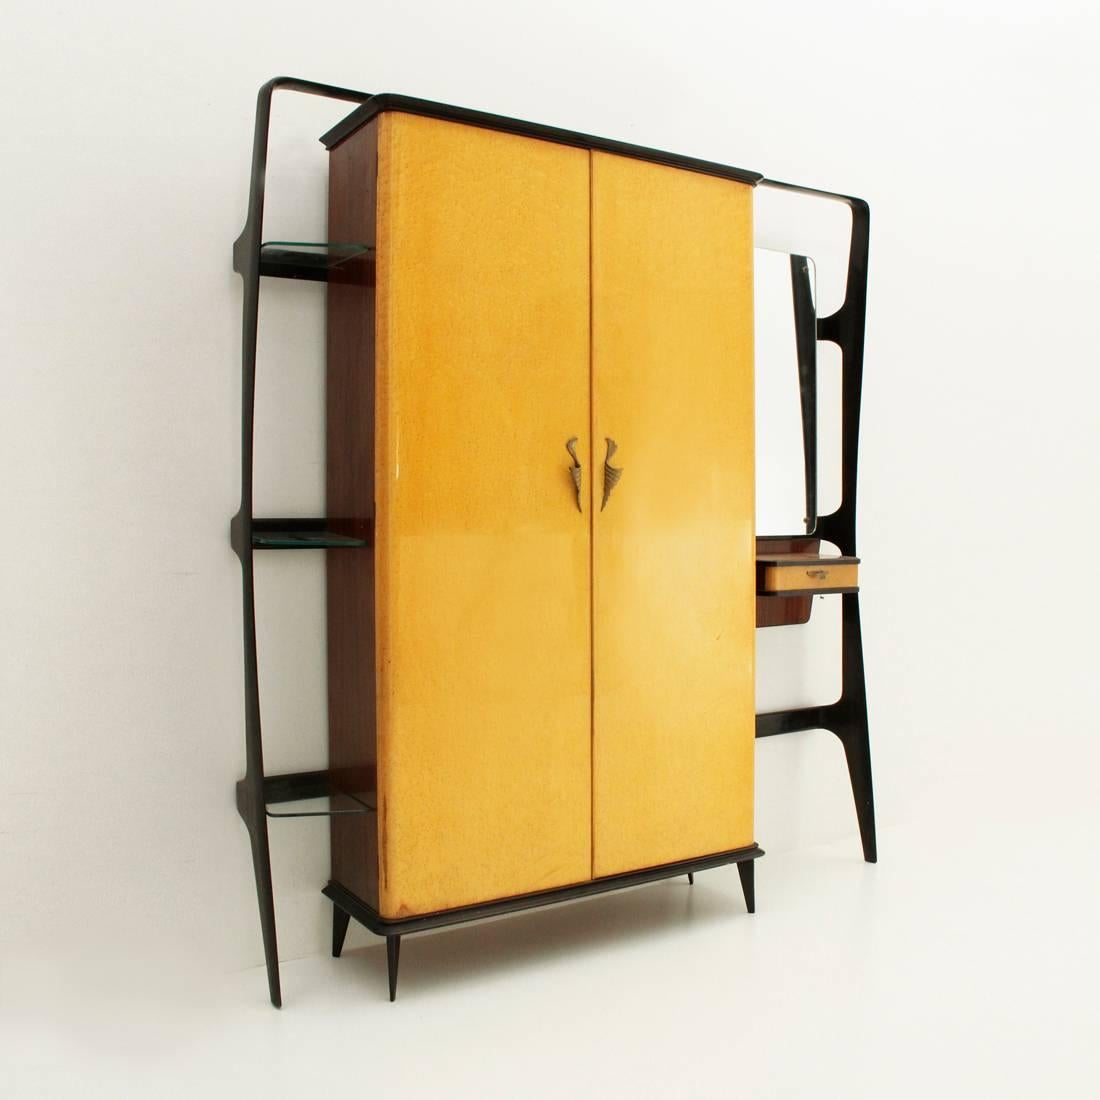 1950s coat rack made by Consorzio Esposizione Mobili Cantù.
Composed of a black-stained wooden frame of modernist forms.
A veneered wood wardrobe, briarwood veneered doors and brass handles. Lower edge, upper and legs in black stained wood. Inside